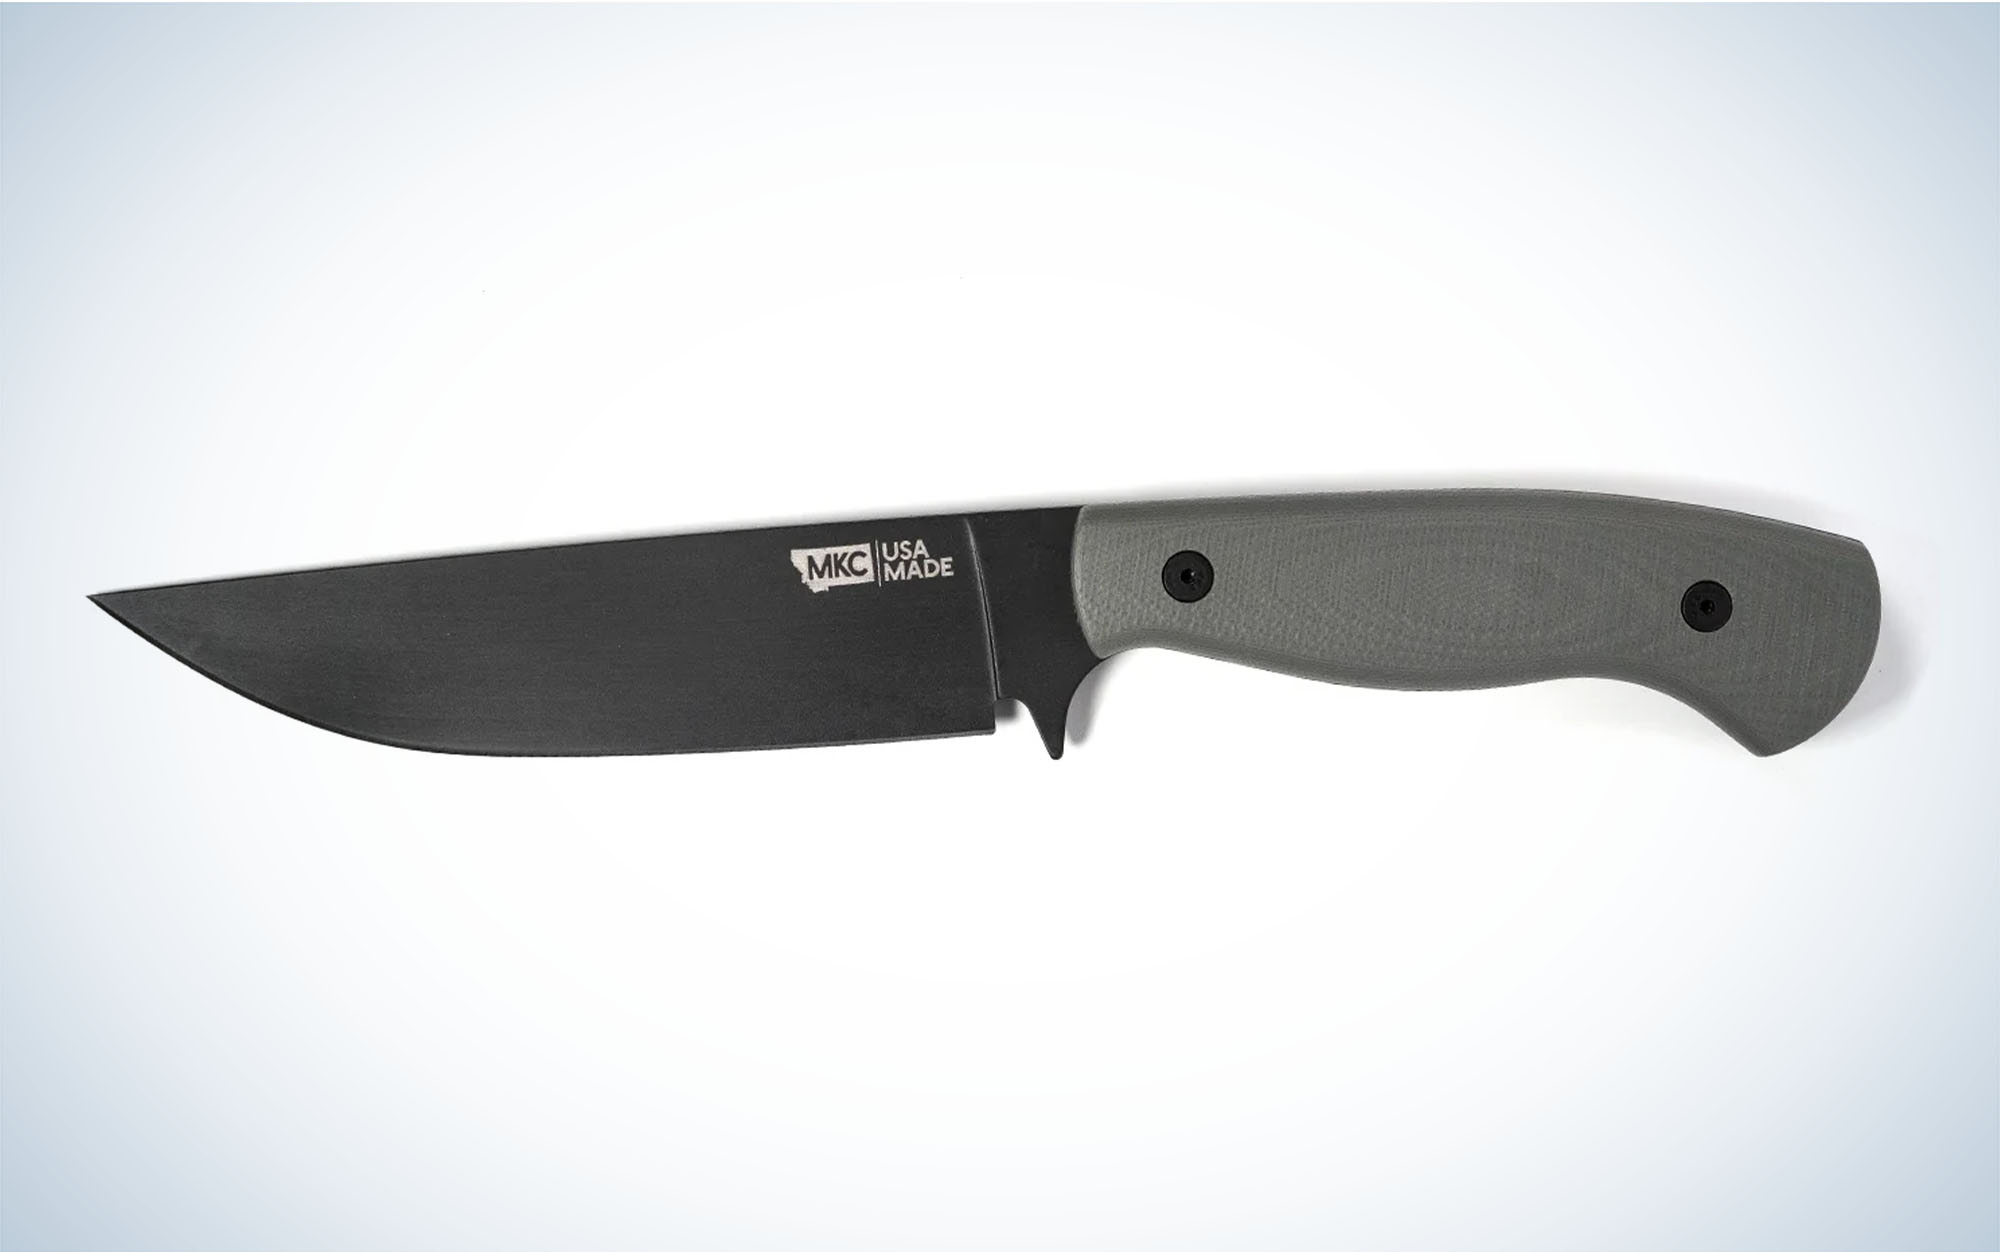 Premium Bubba Blade Knives for Every Angler - Bubba Blade Knives Haven